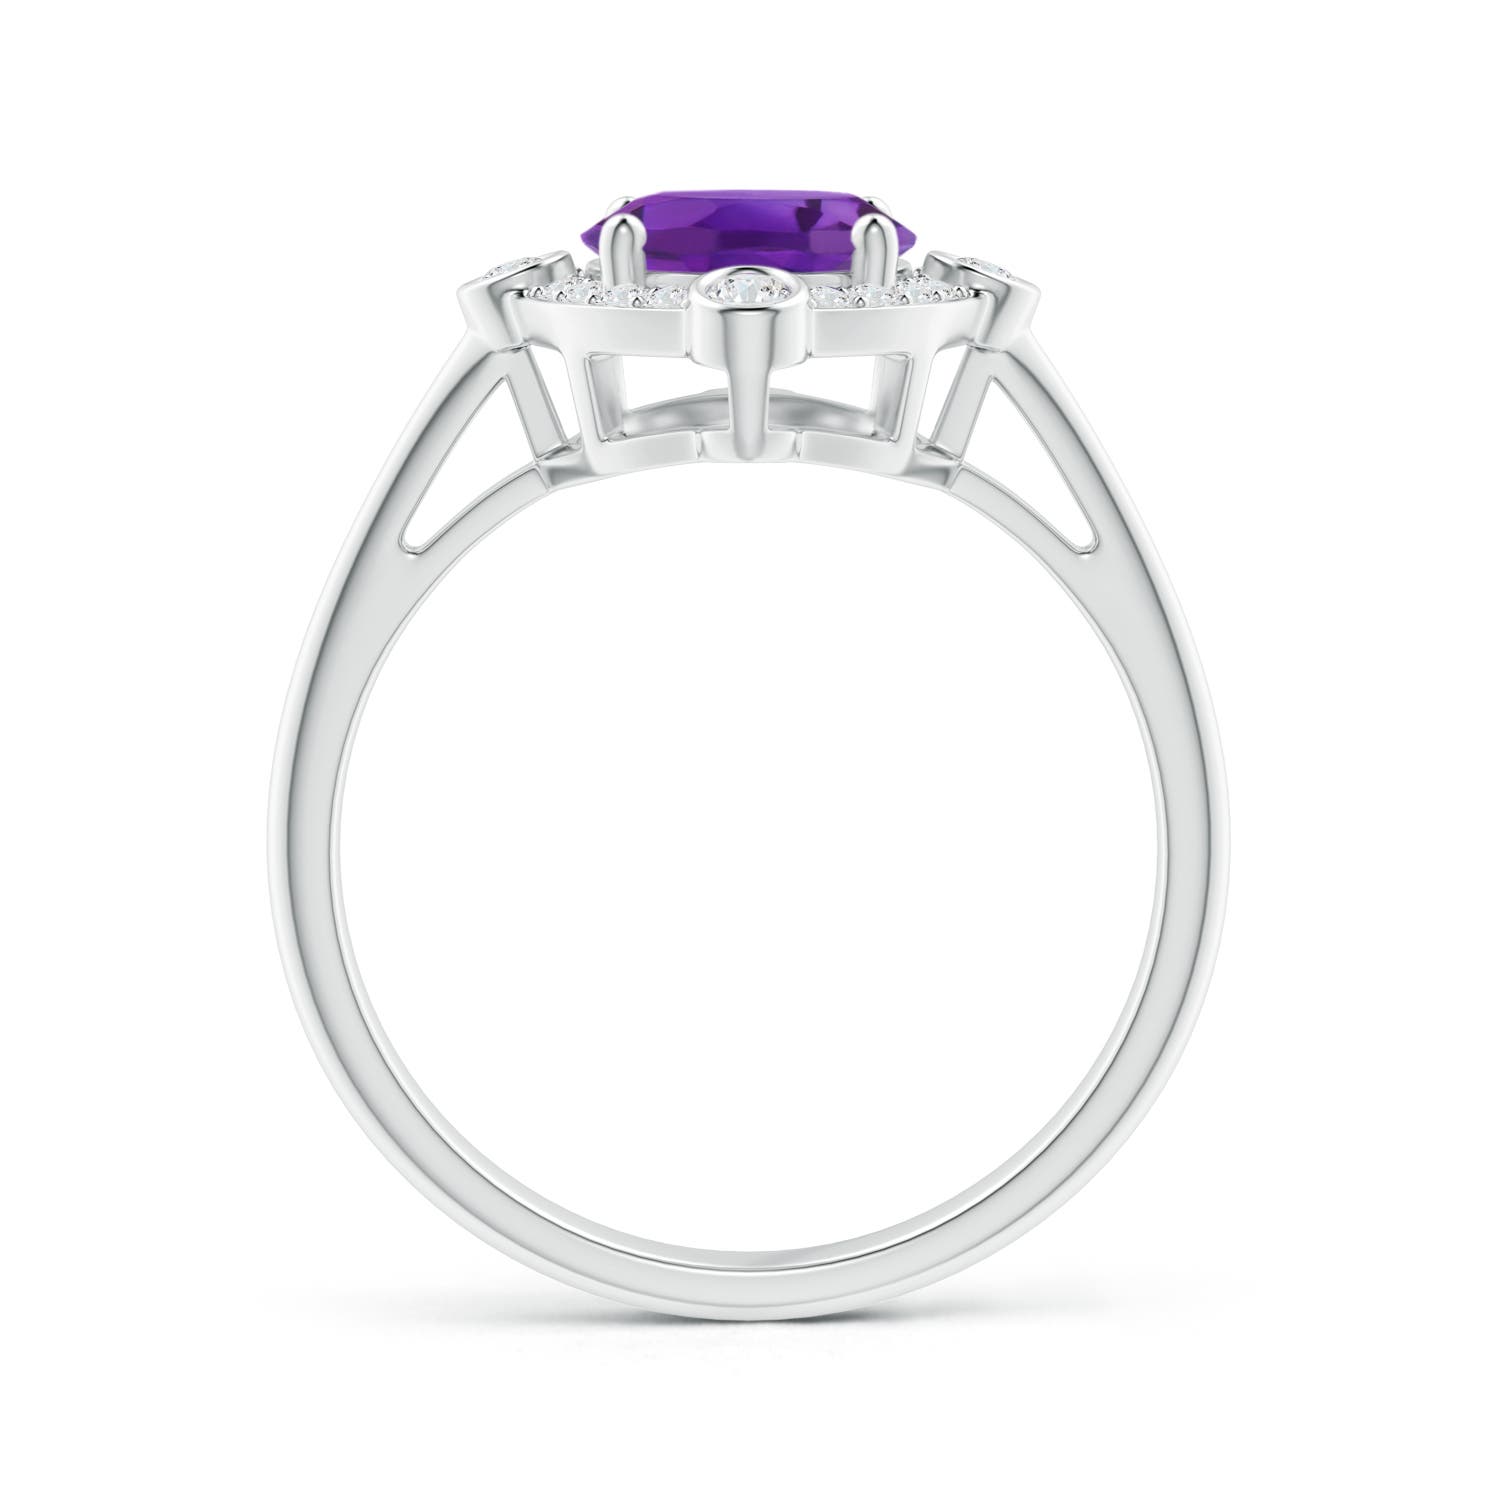 AAA - Amethyst / 1.74 CT / 14 KT White Gold